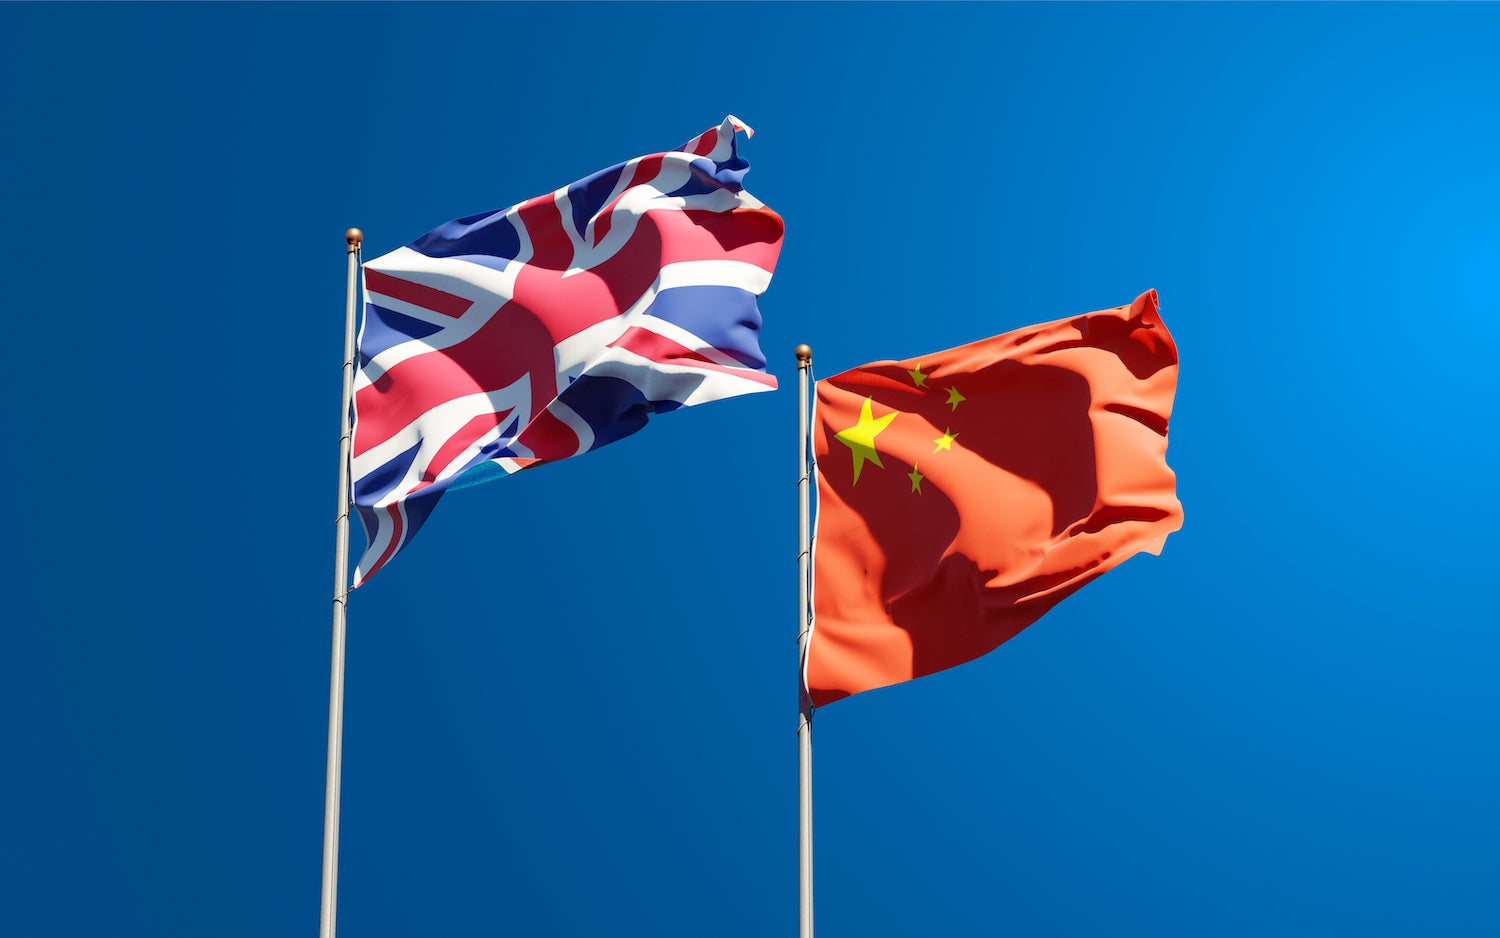 The national flags of the United Kingdom and China together.